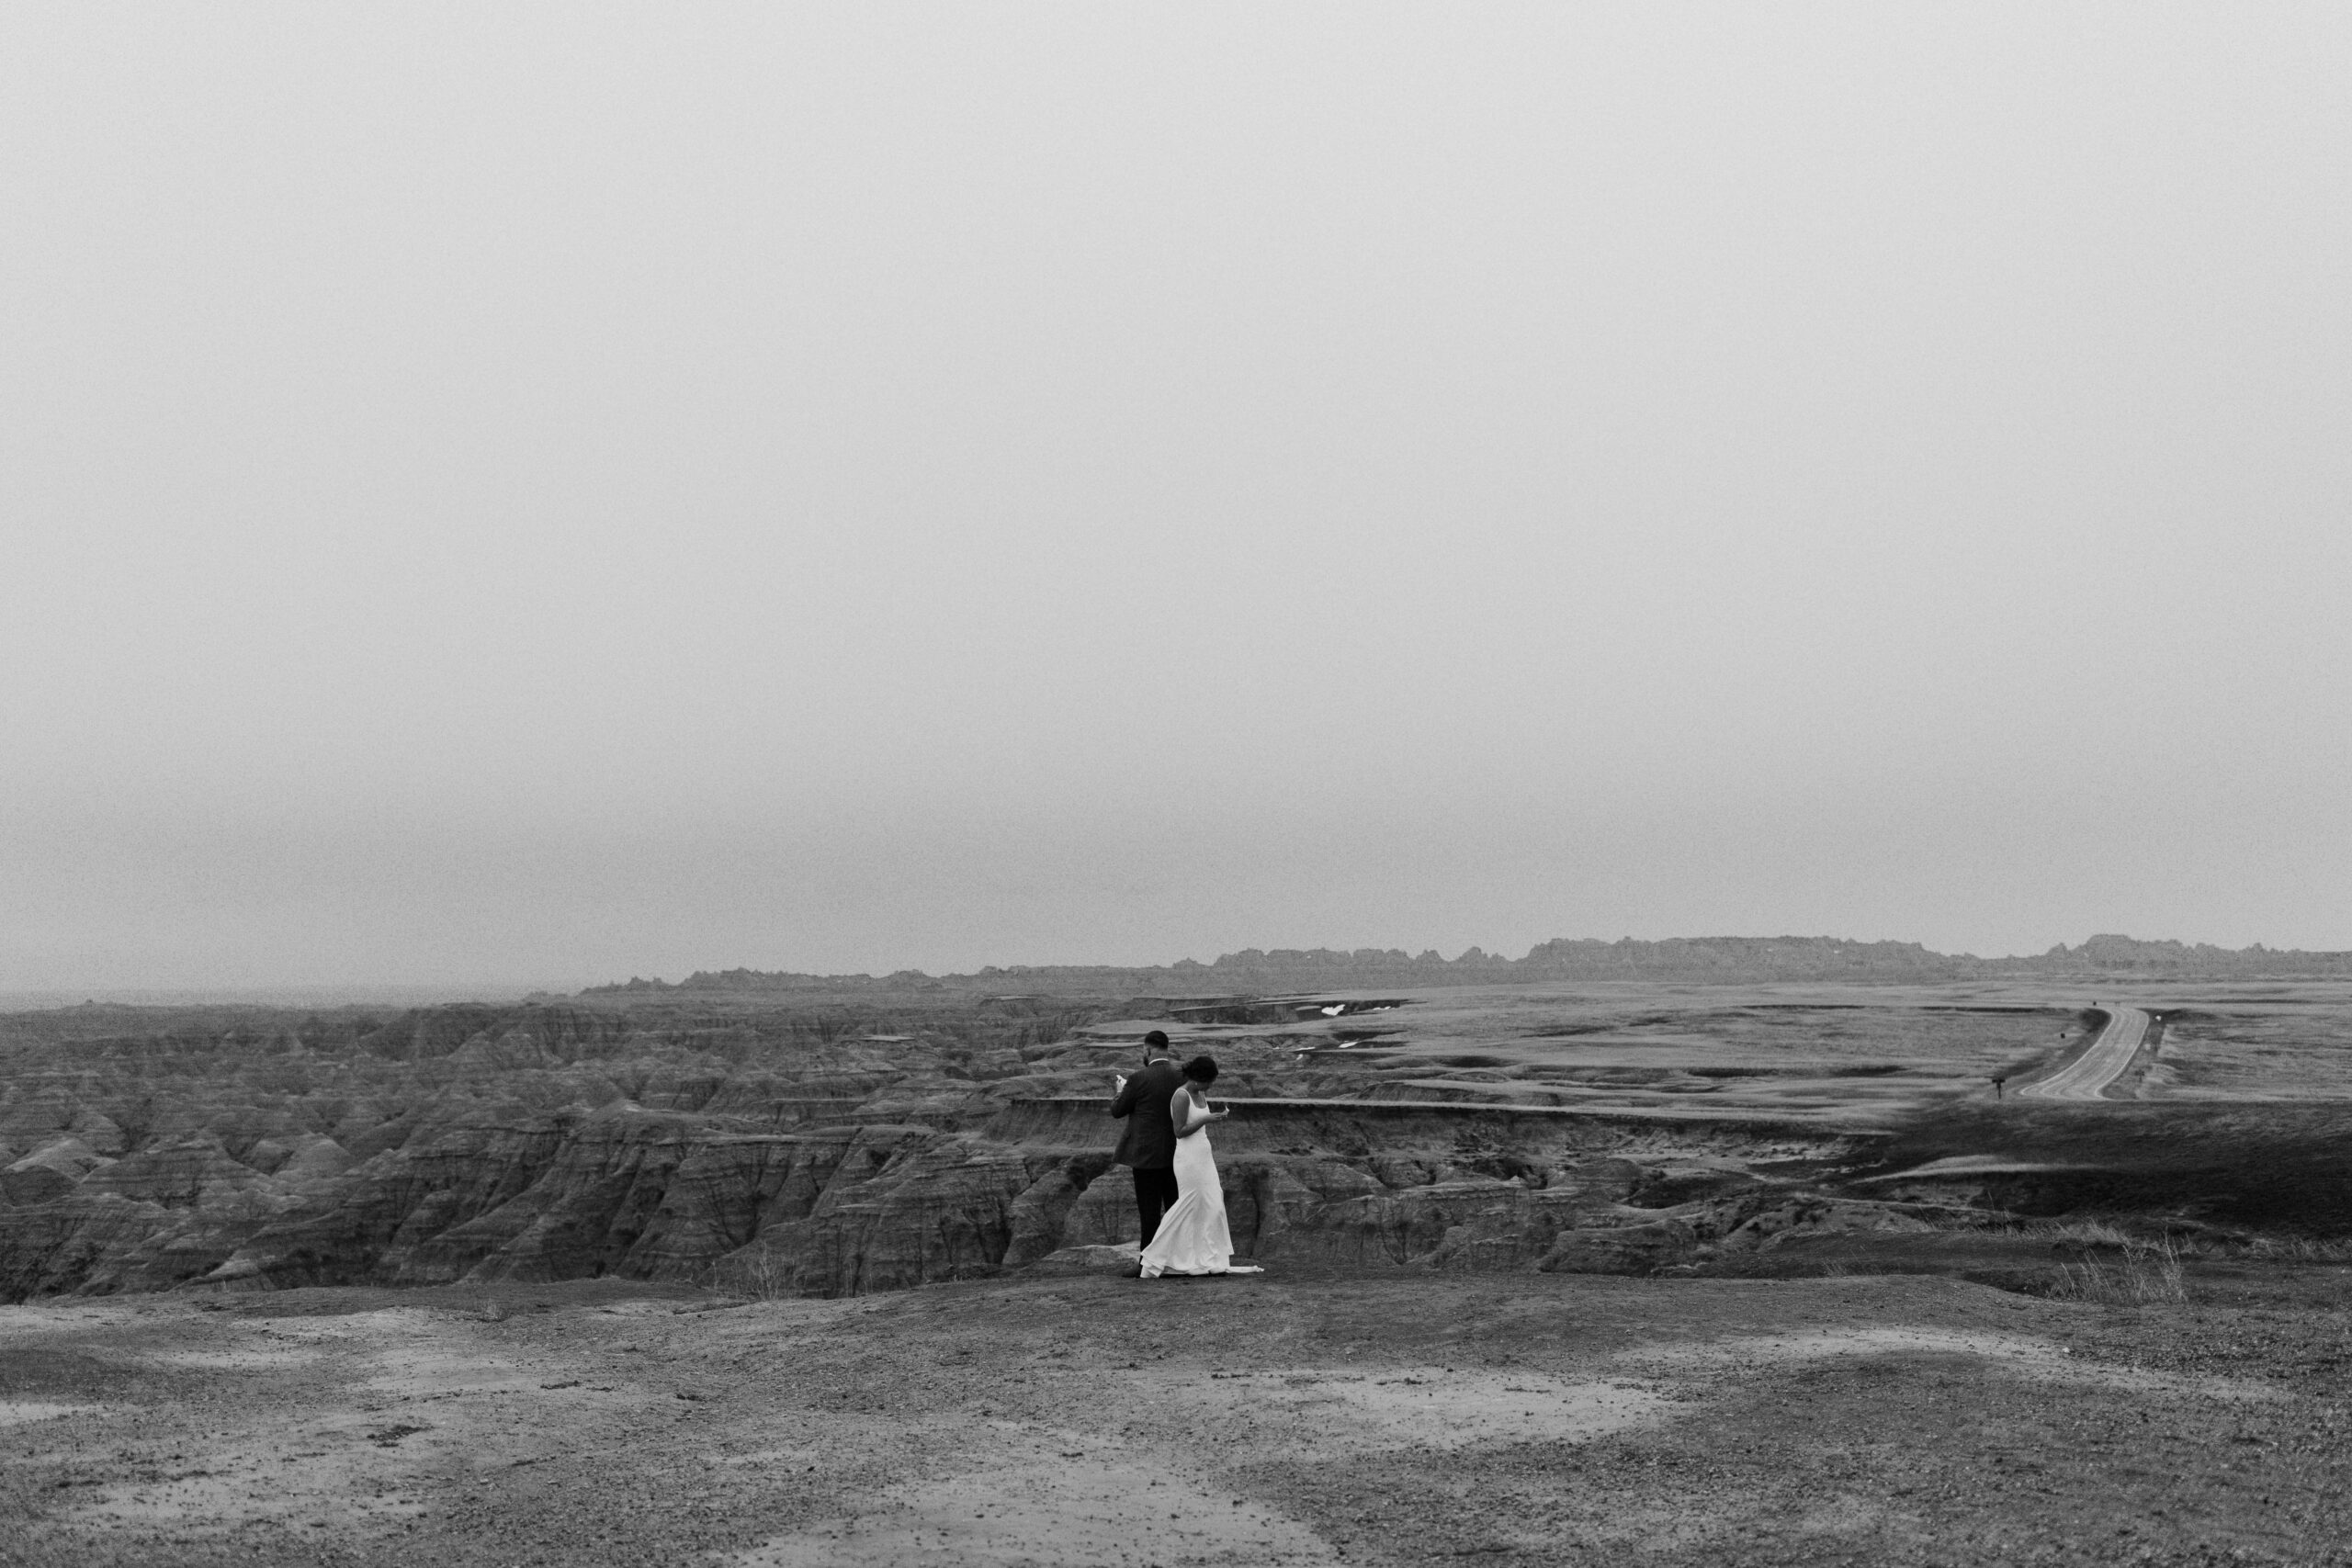 A black and white wedding photo shows a couple admiring Badlands National Park